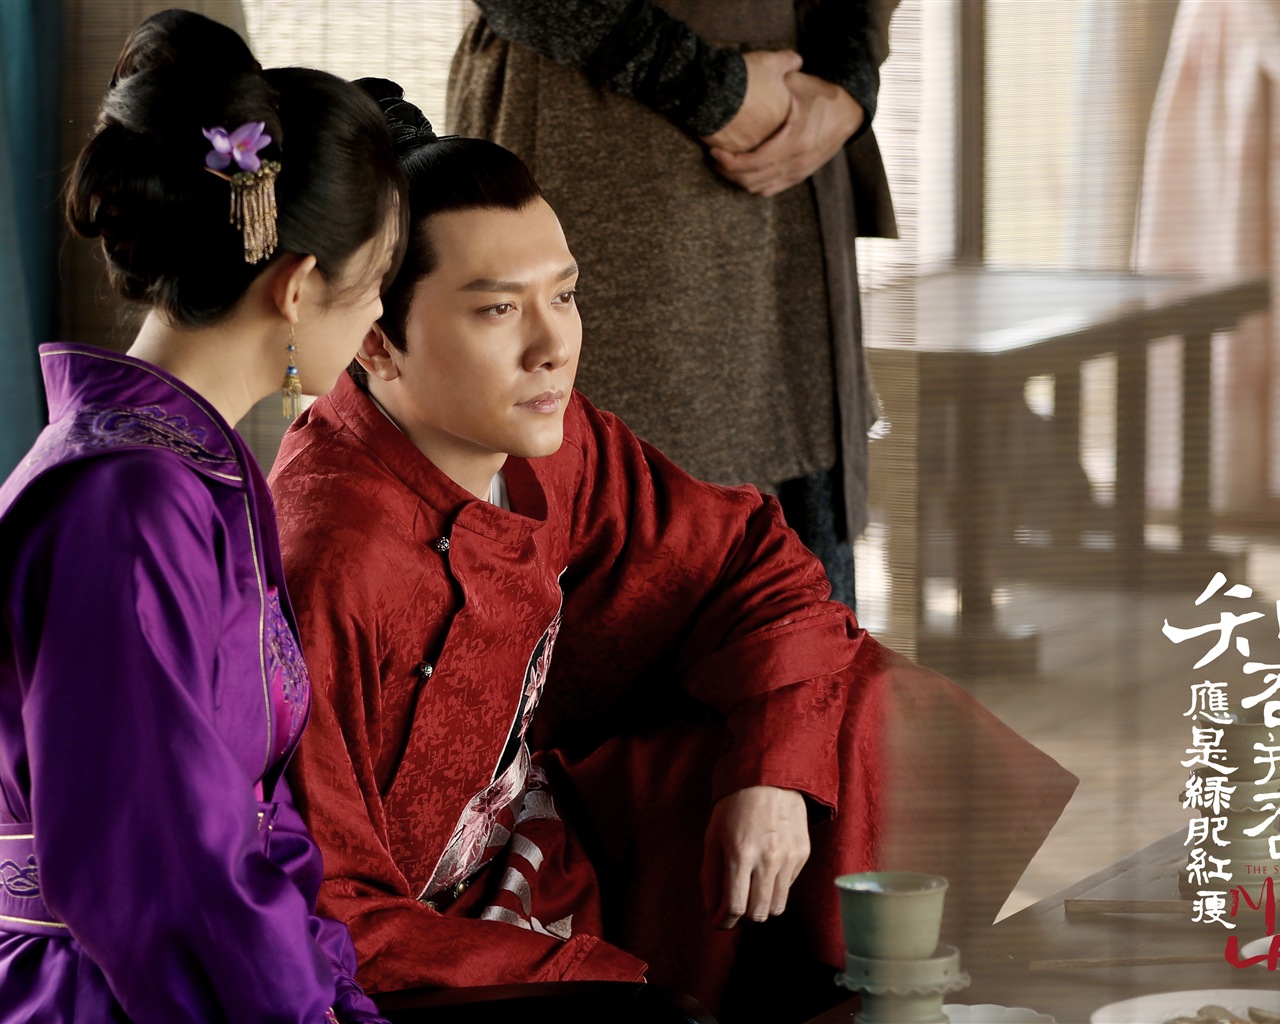 The Story Of MingLan, TV series HD wallpapers #42 - 1280x1024